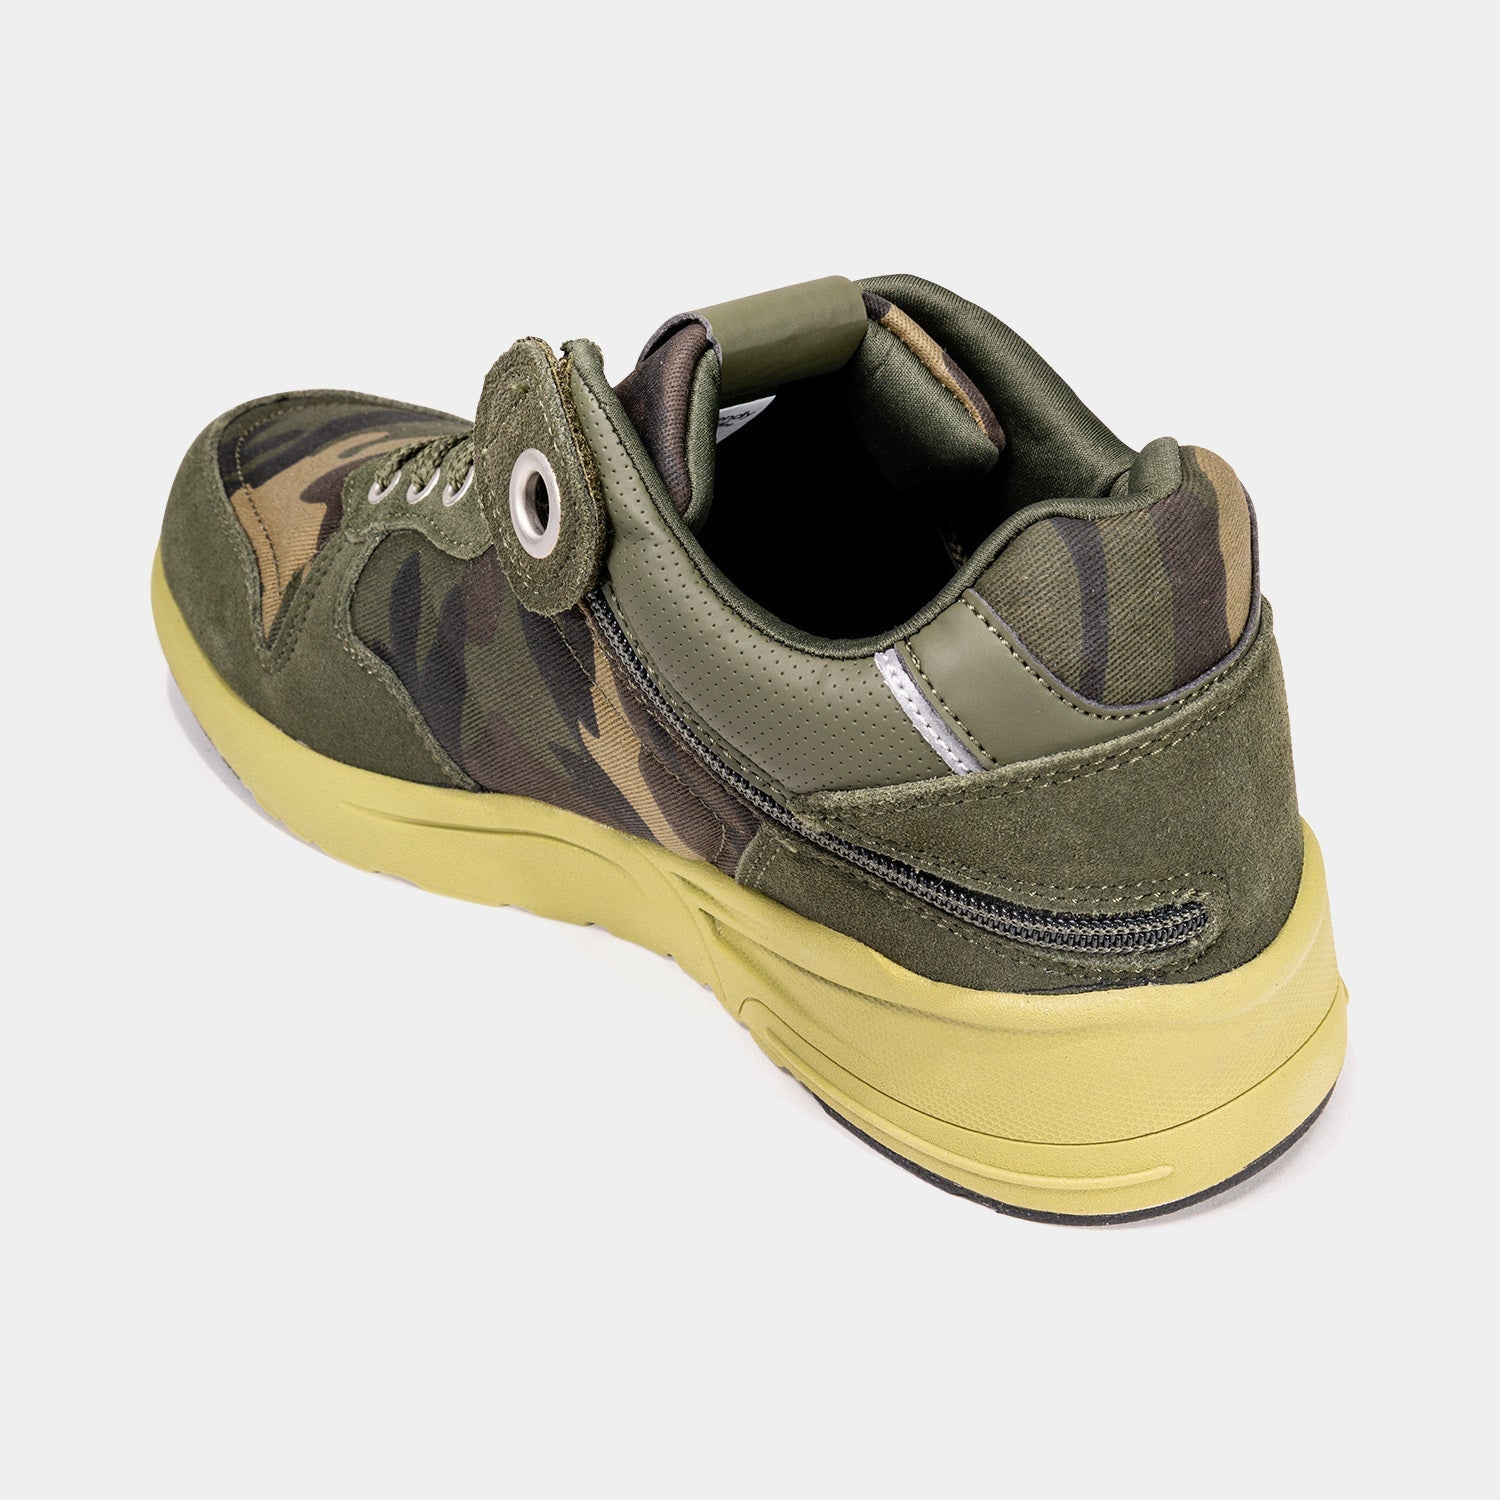 Camo and dark green mens shoe with rear zipper access and light green anti slip soles.